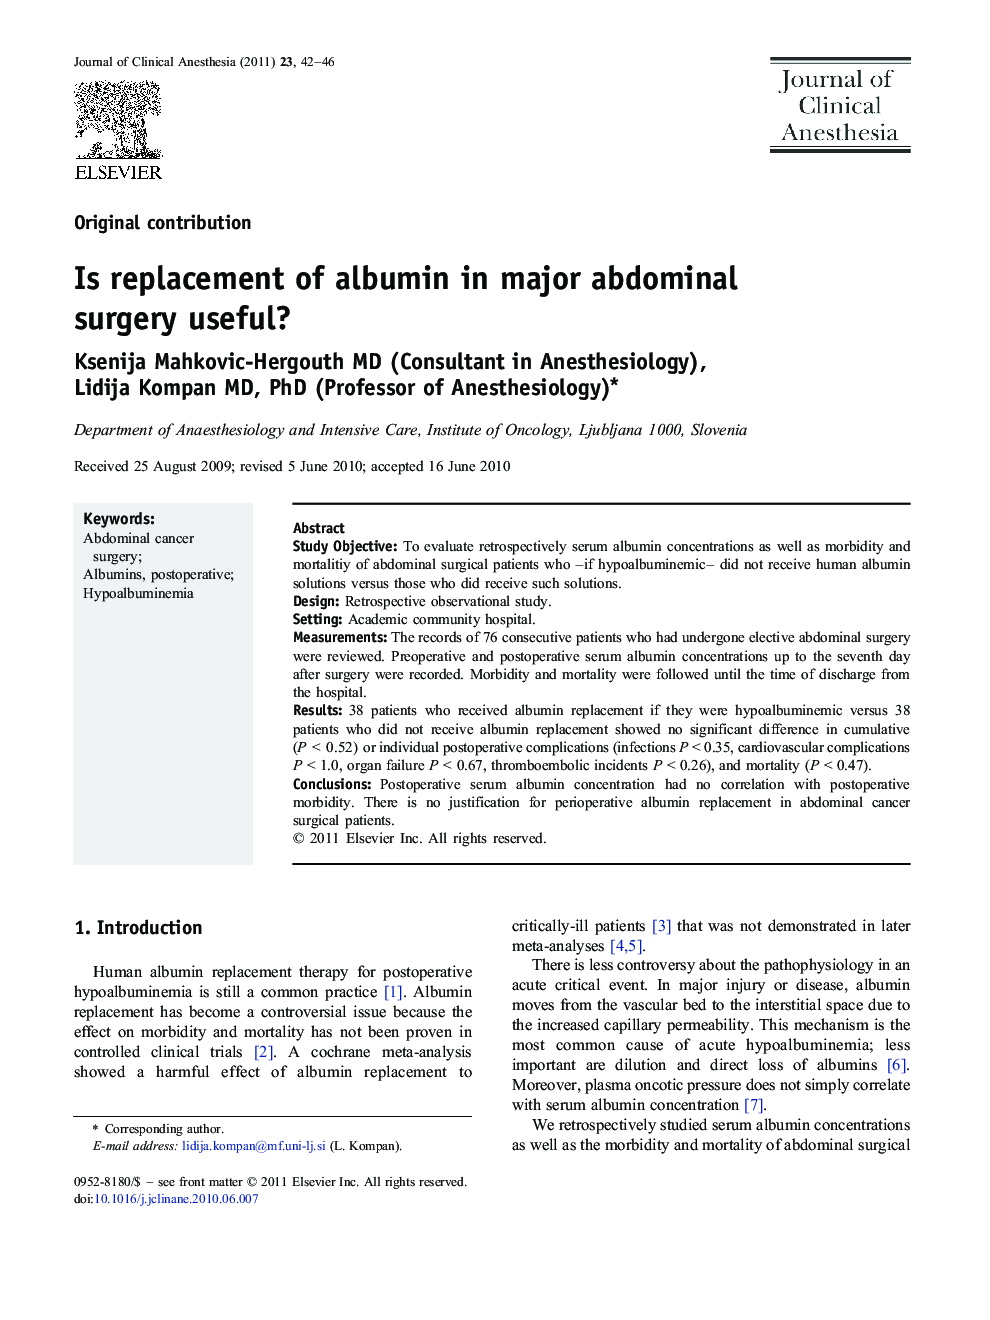 Is replacement of albumin in major abdominal surgery useful?